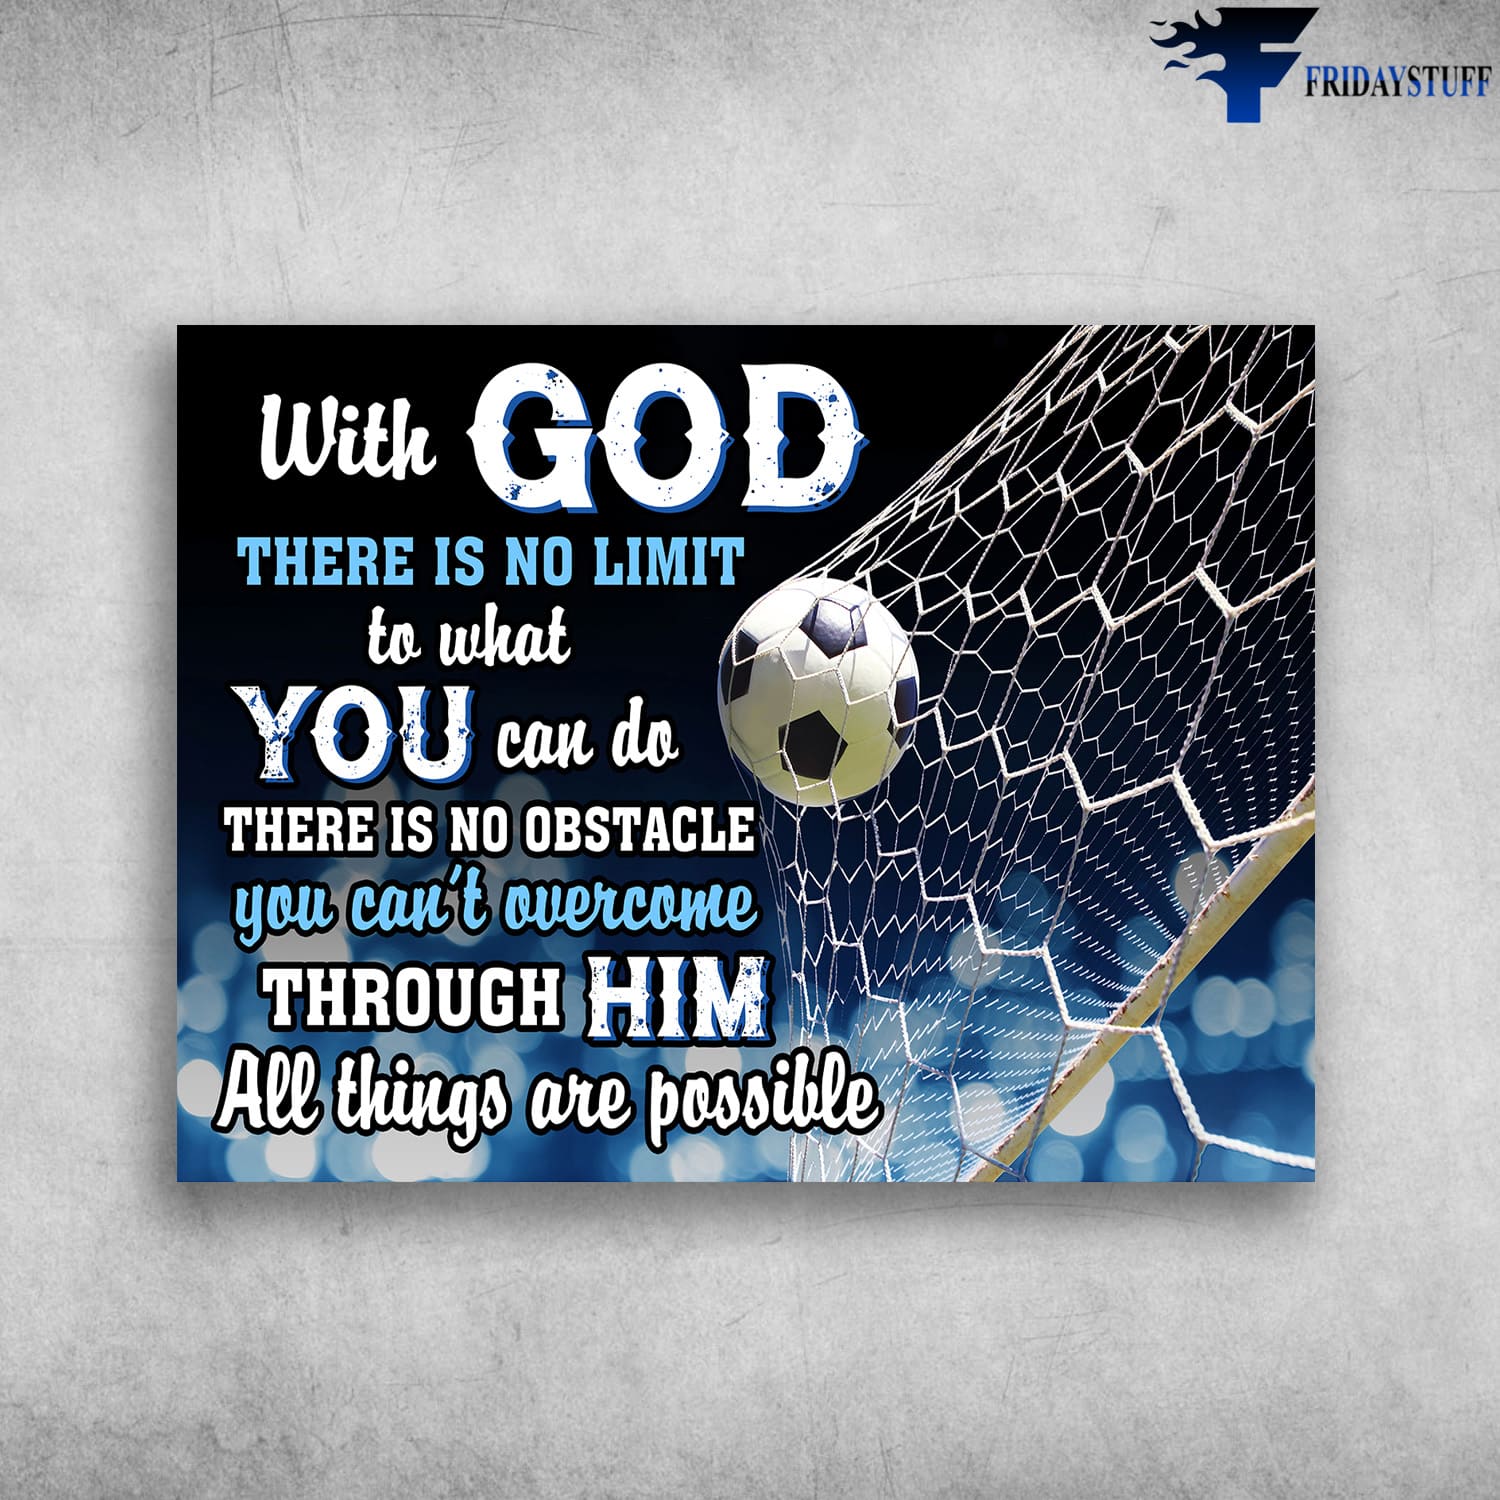 Soccer Poster, With God, There Is No Limit, To What You Can Do, There Is No Obstacle, You Can't Overcome Through Him, All Things Are Possible